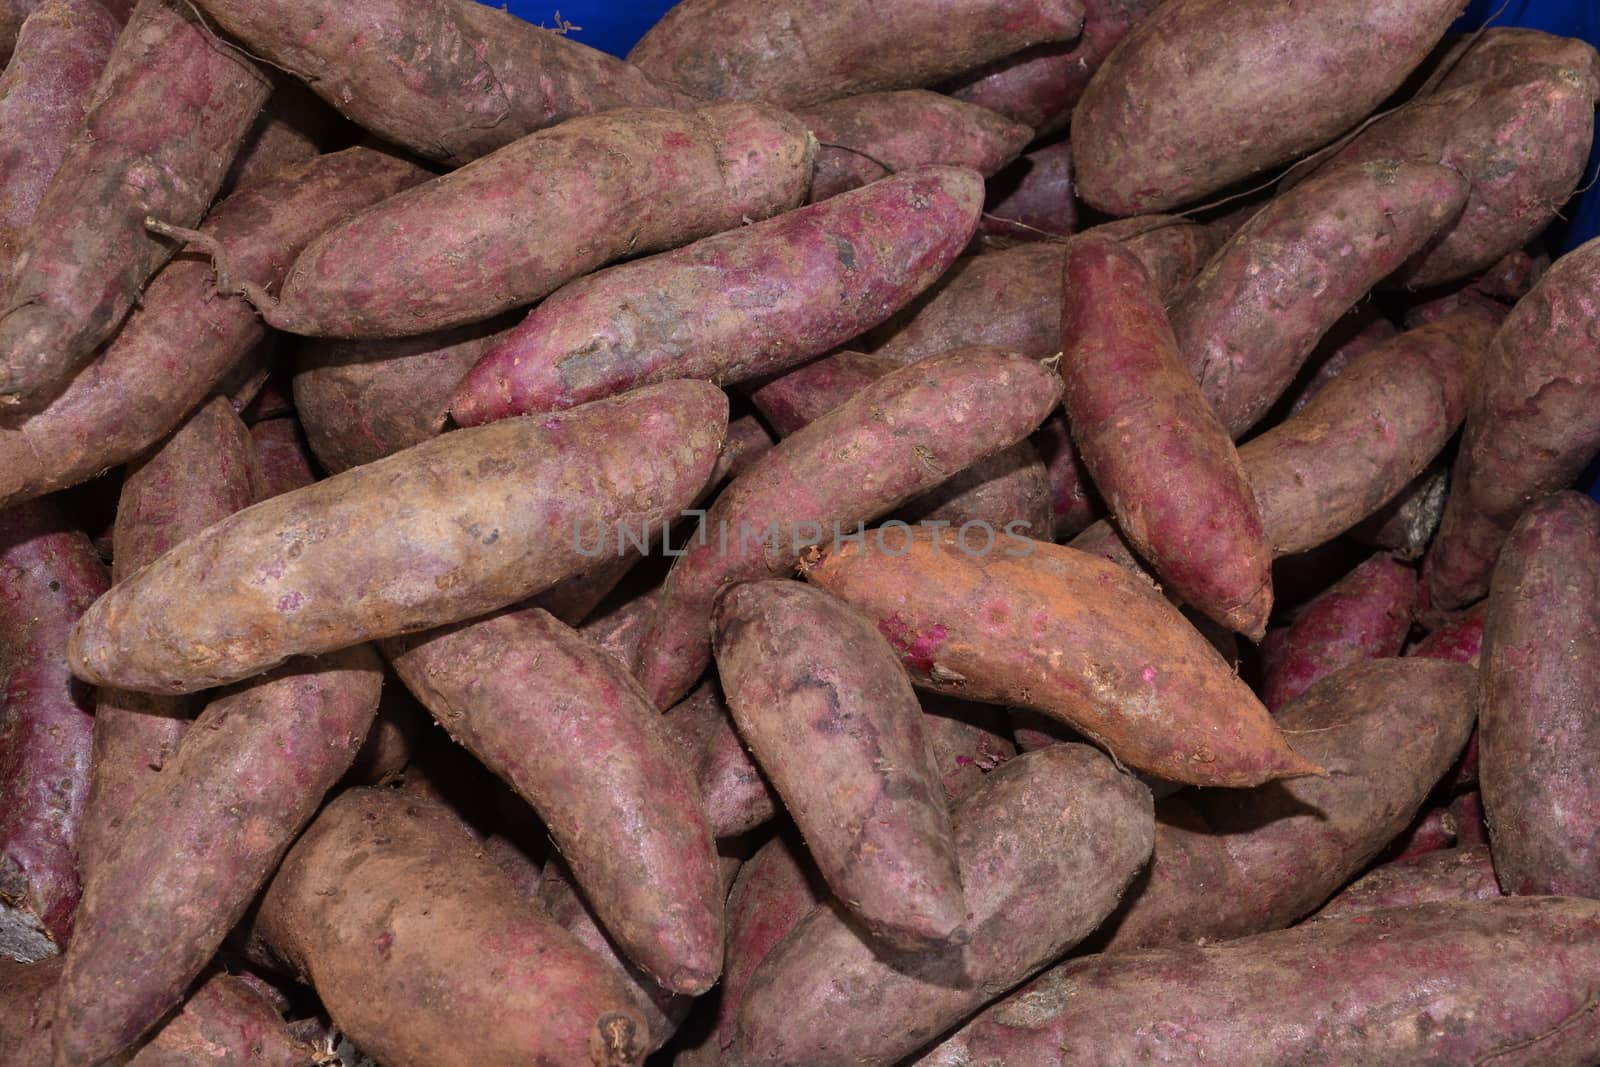 sweet potato or yam pile image which can be used as a background. by ideation90